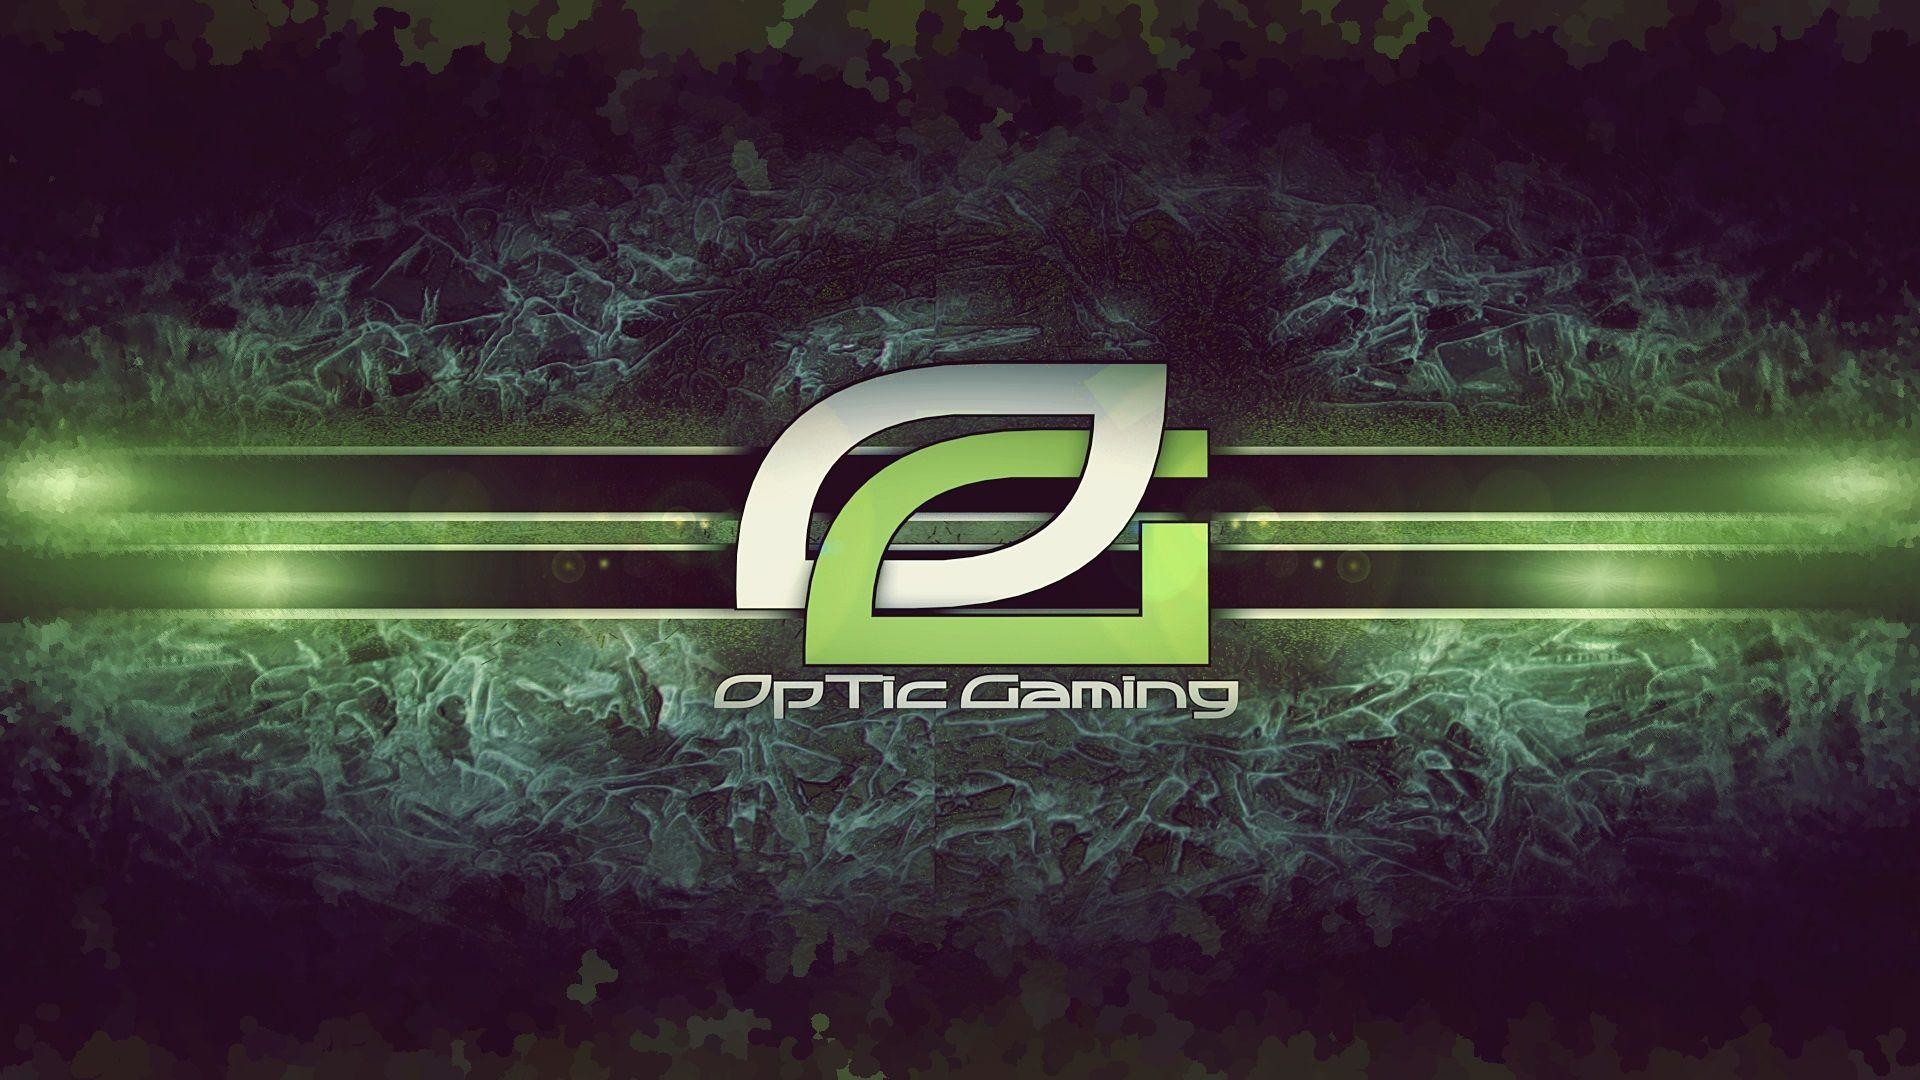 1920x1080 Optic Gaming Backgrounds | Wallpapers, Backgrounds, Images, Art ..